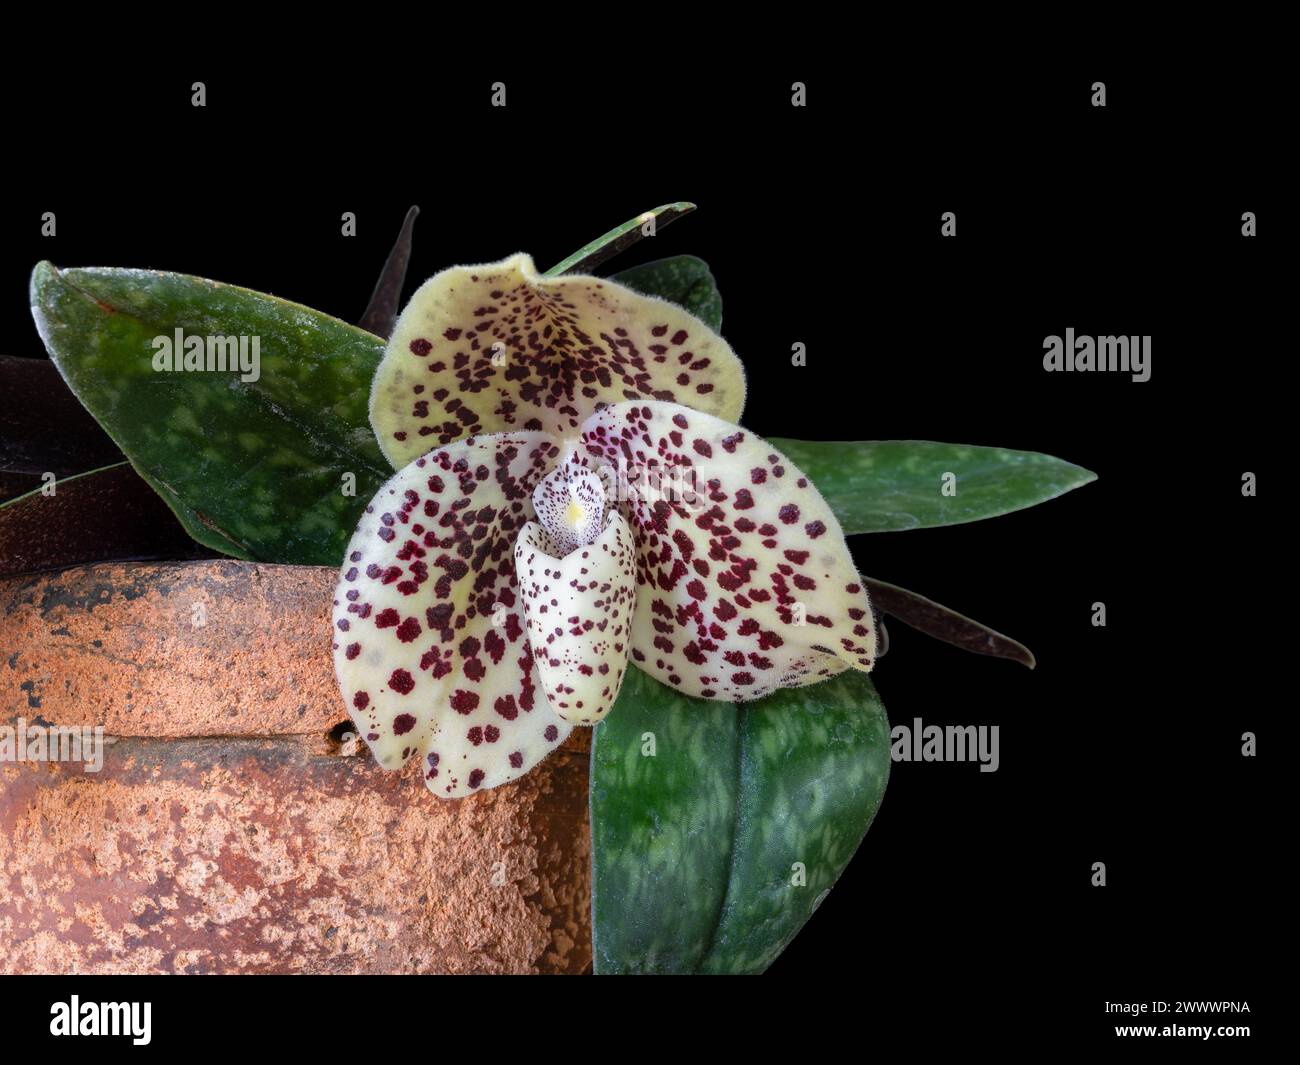 Closeup view of lady slipper orchid species paphiopedilum bellatulum or egg-in-a-nest with purple and creamy white flower isolated on black background Stock Photo